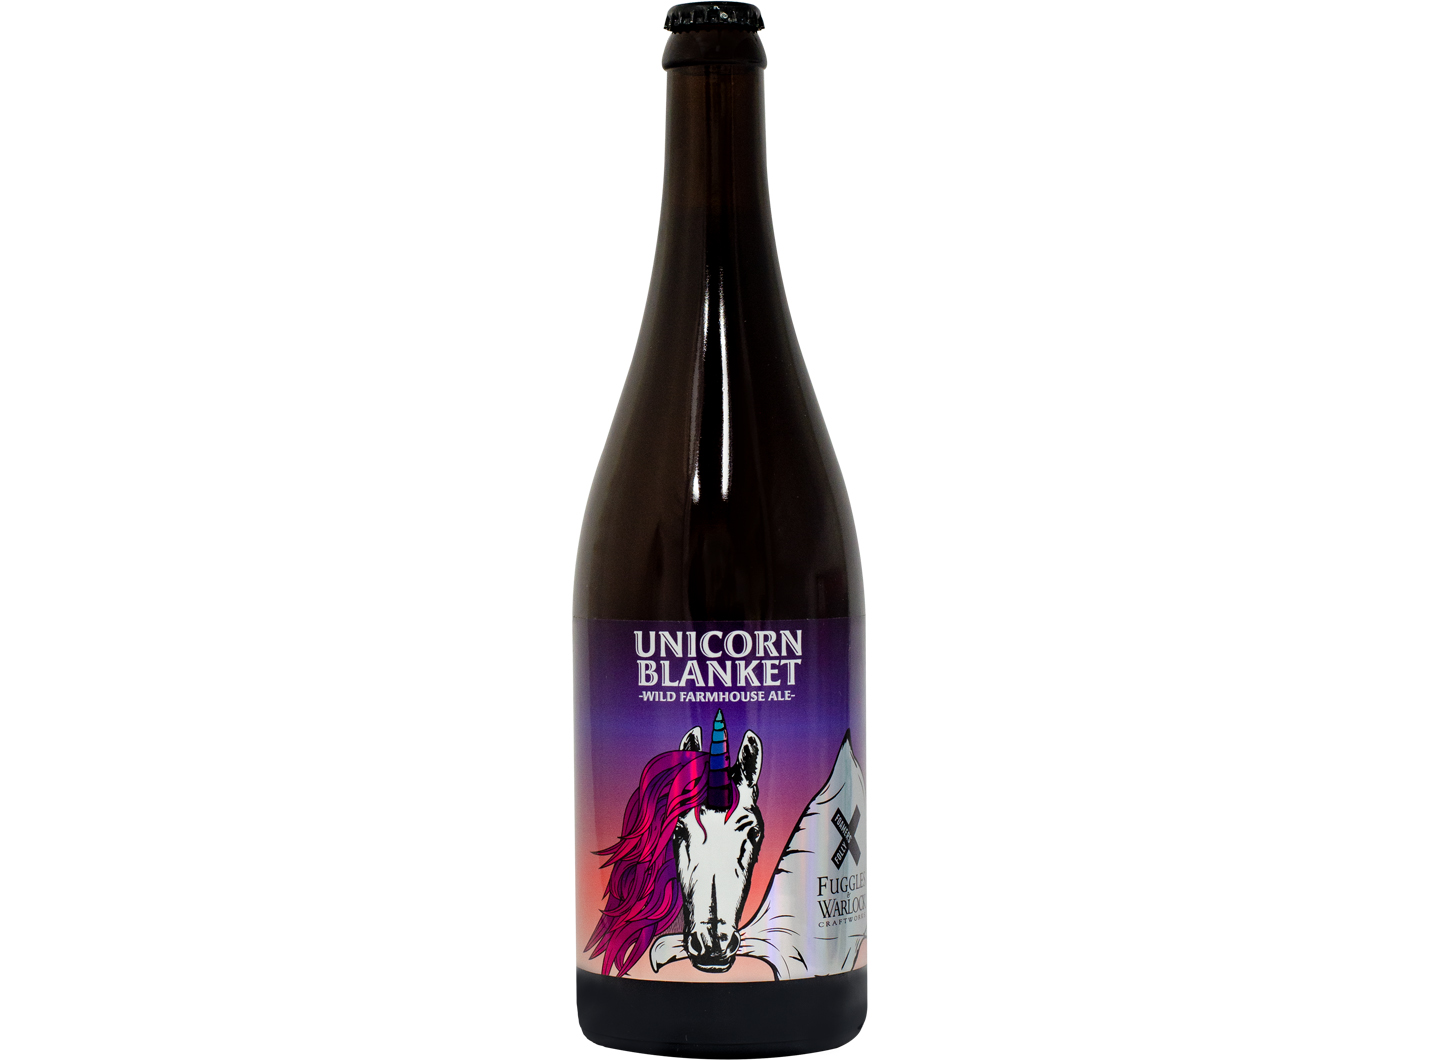 Unicorn Blanket by Foamers' Folly Brewing Co. and Fruggles & Warlock Craftworks